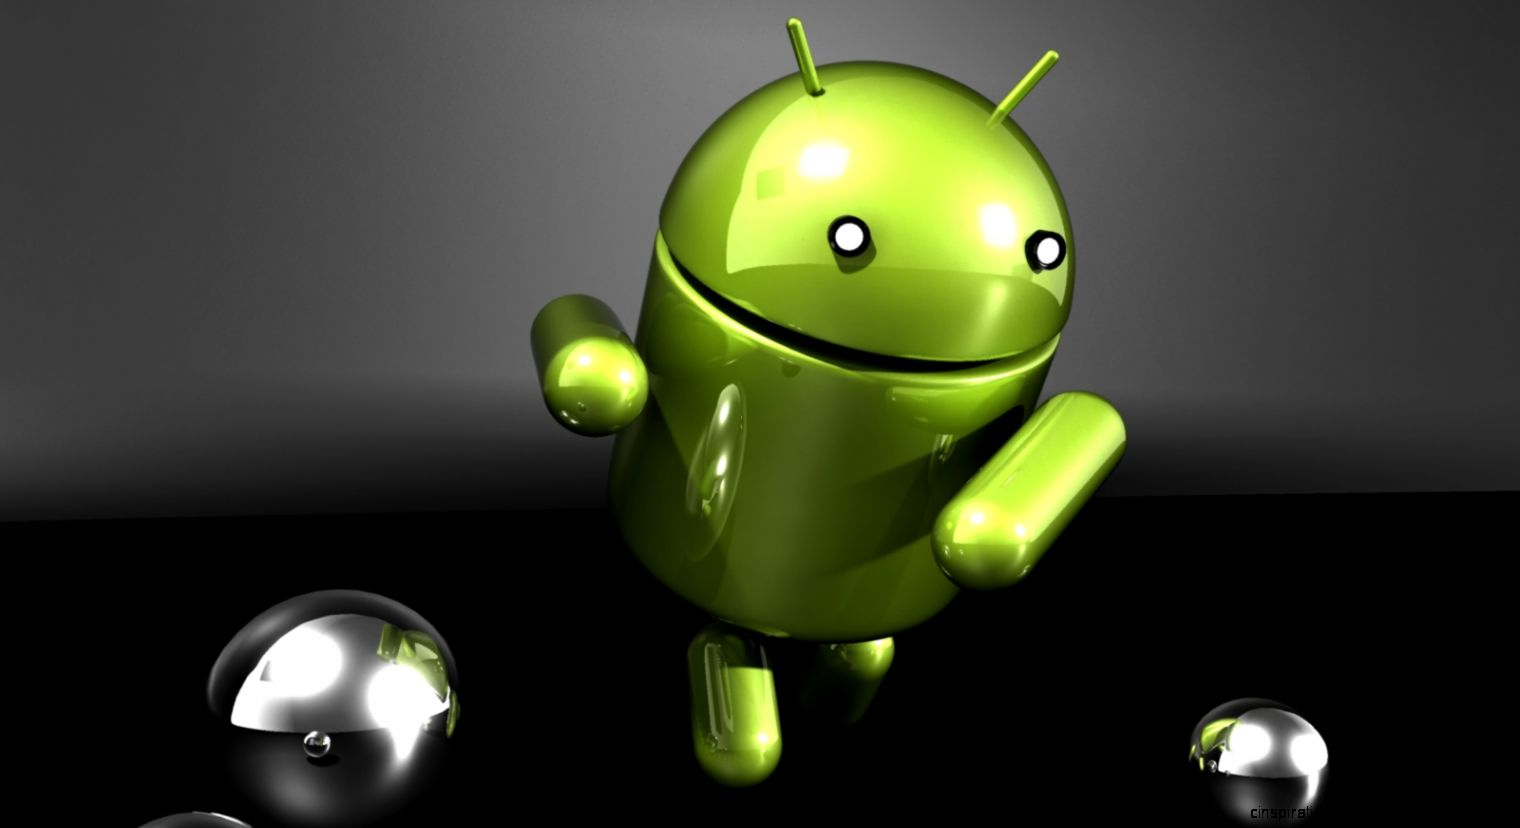 Wallpaper 3D Hd Movimiento Android